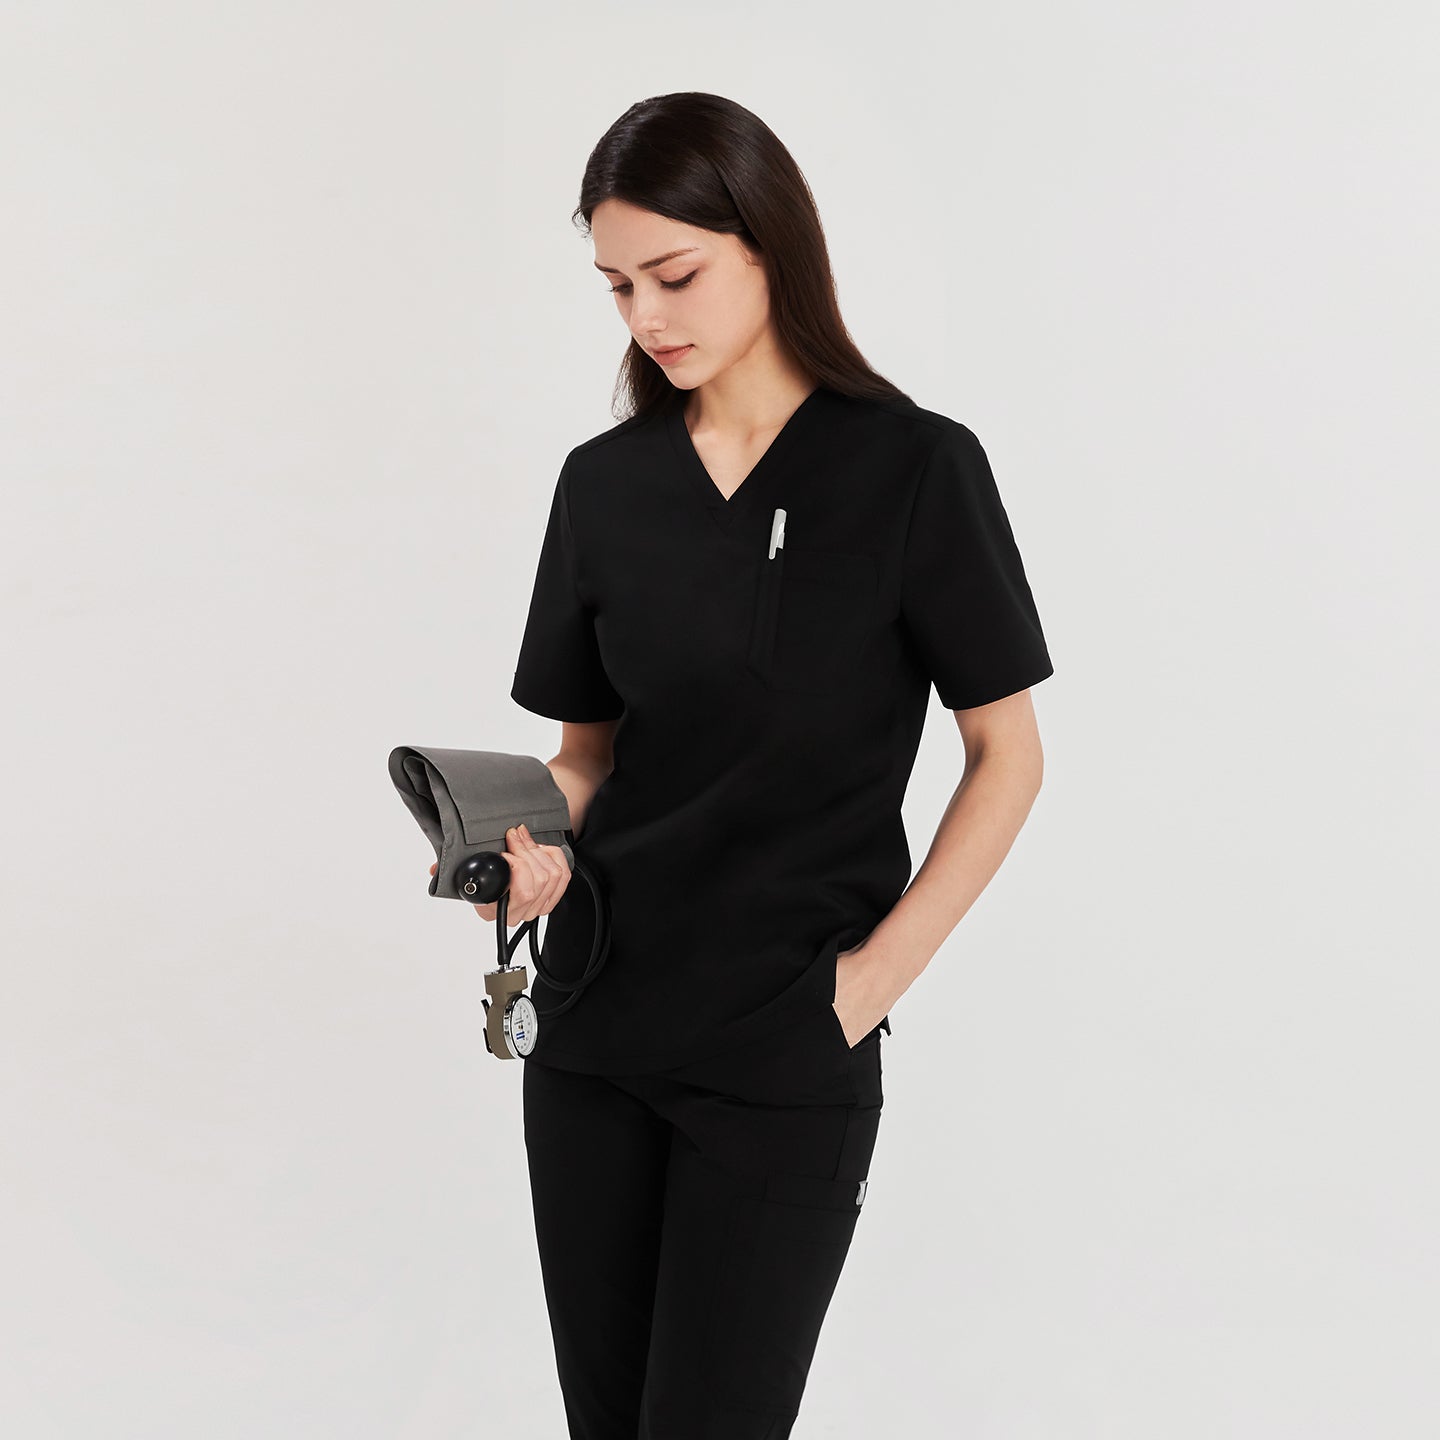 Woman in black Zenir scrub top with chest pocket, holding a blood pressure monitor, looking down, Black